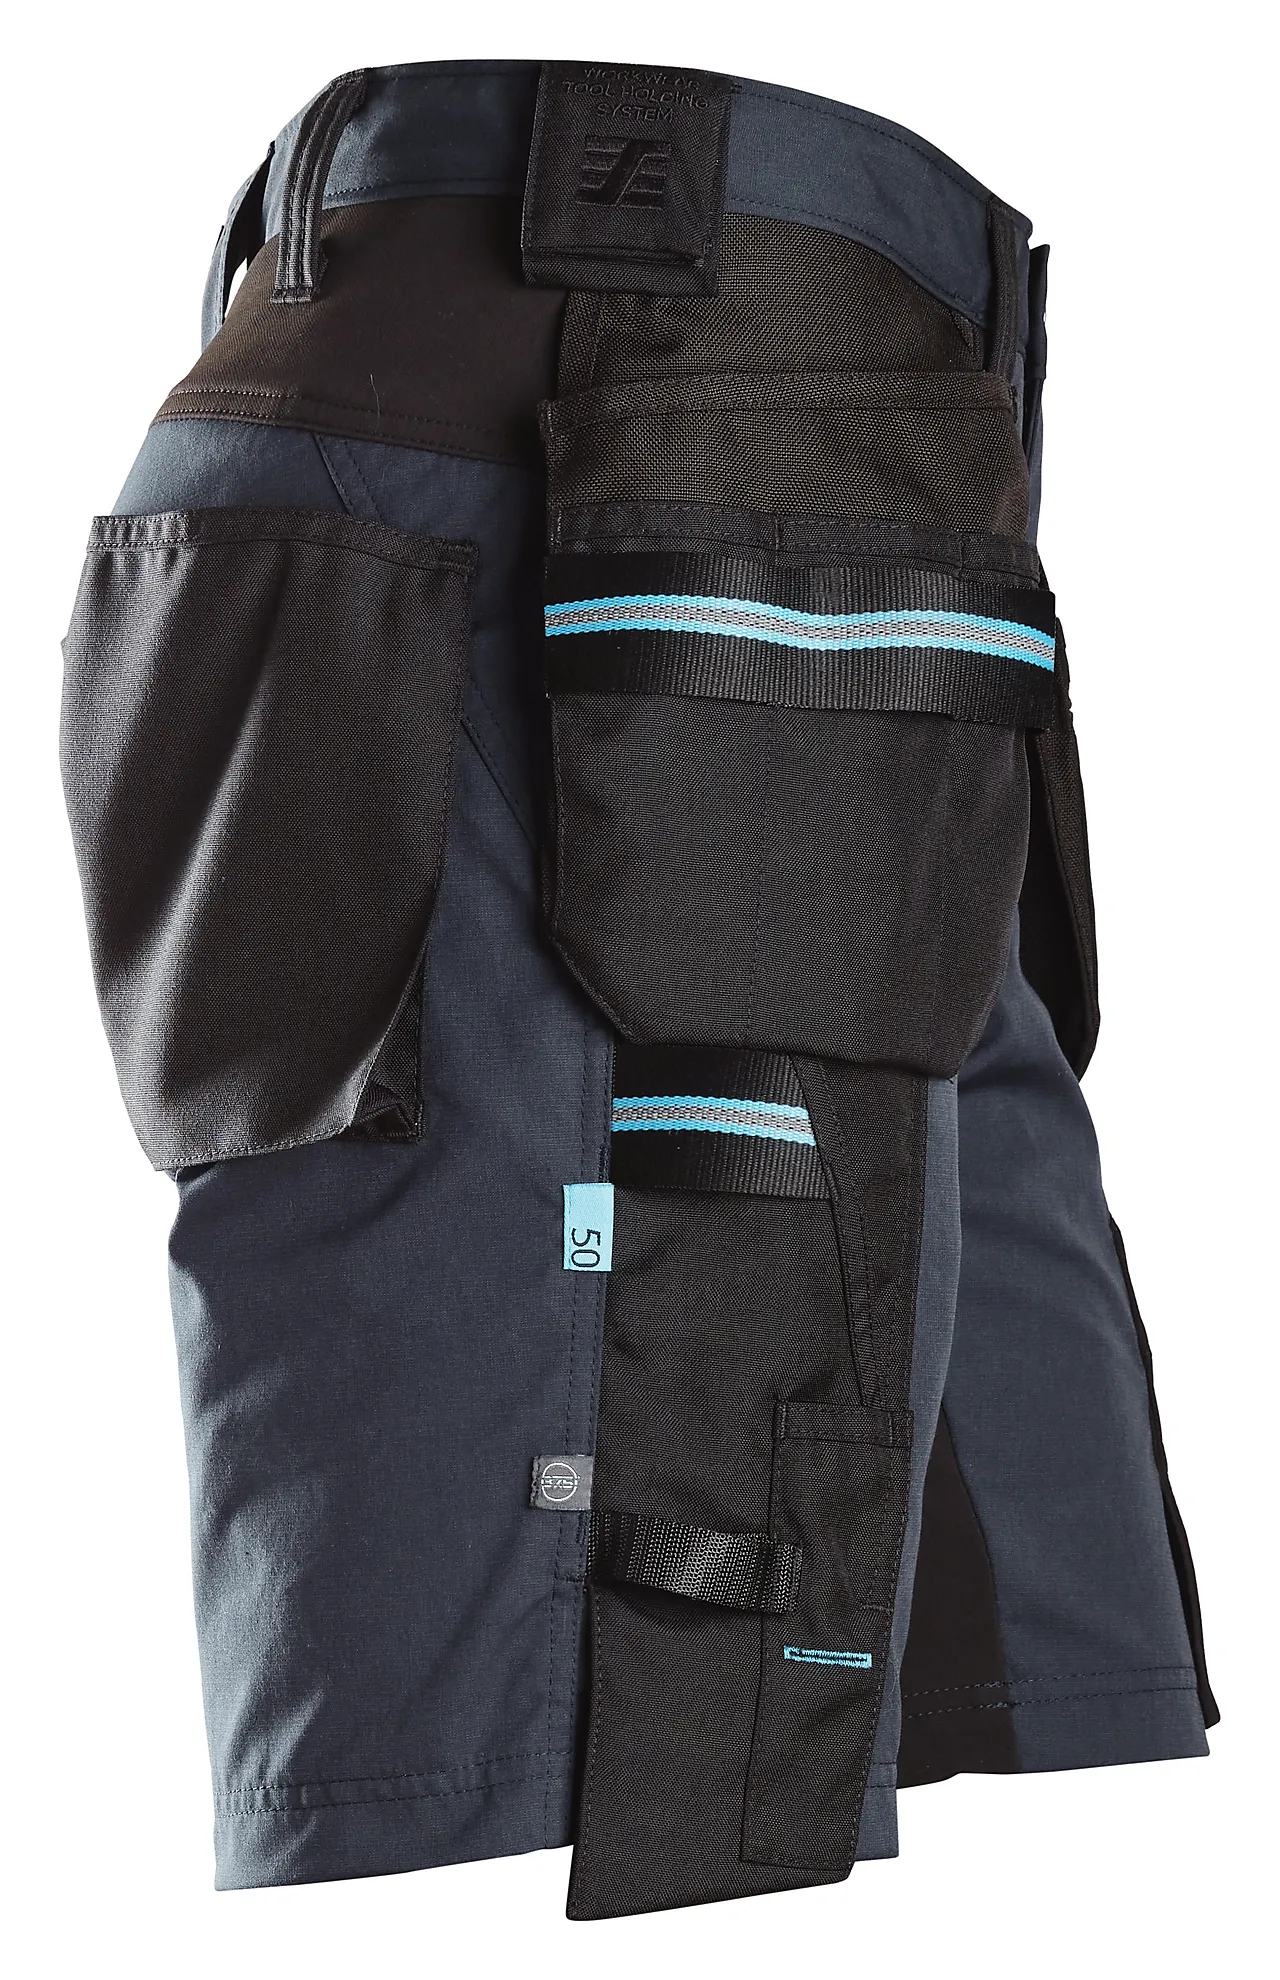 Shorts 6110 mblå/sor hl 70 snickers workwear null - null - 2 - Miniatyr